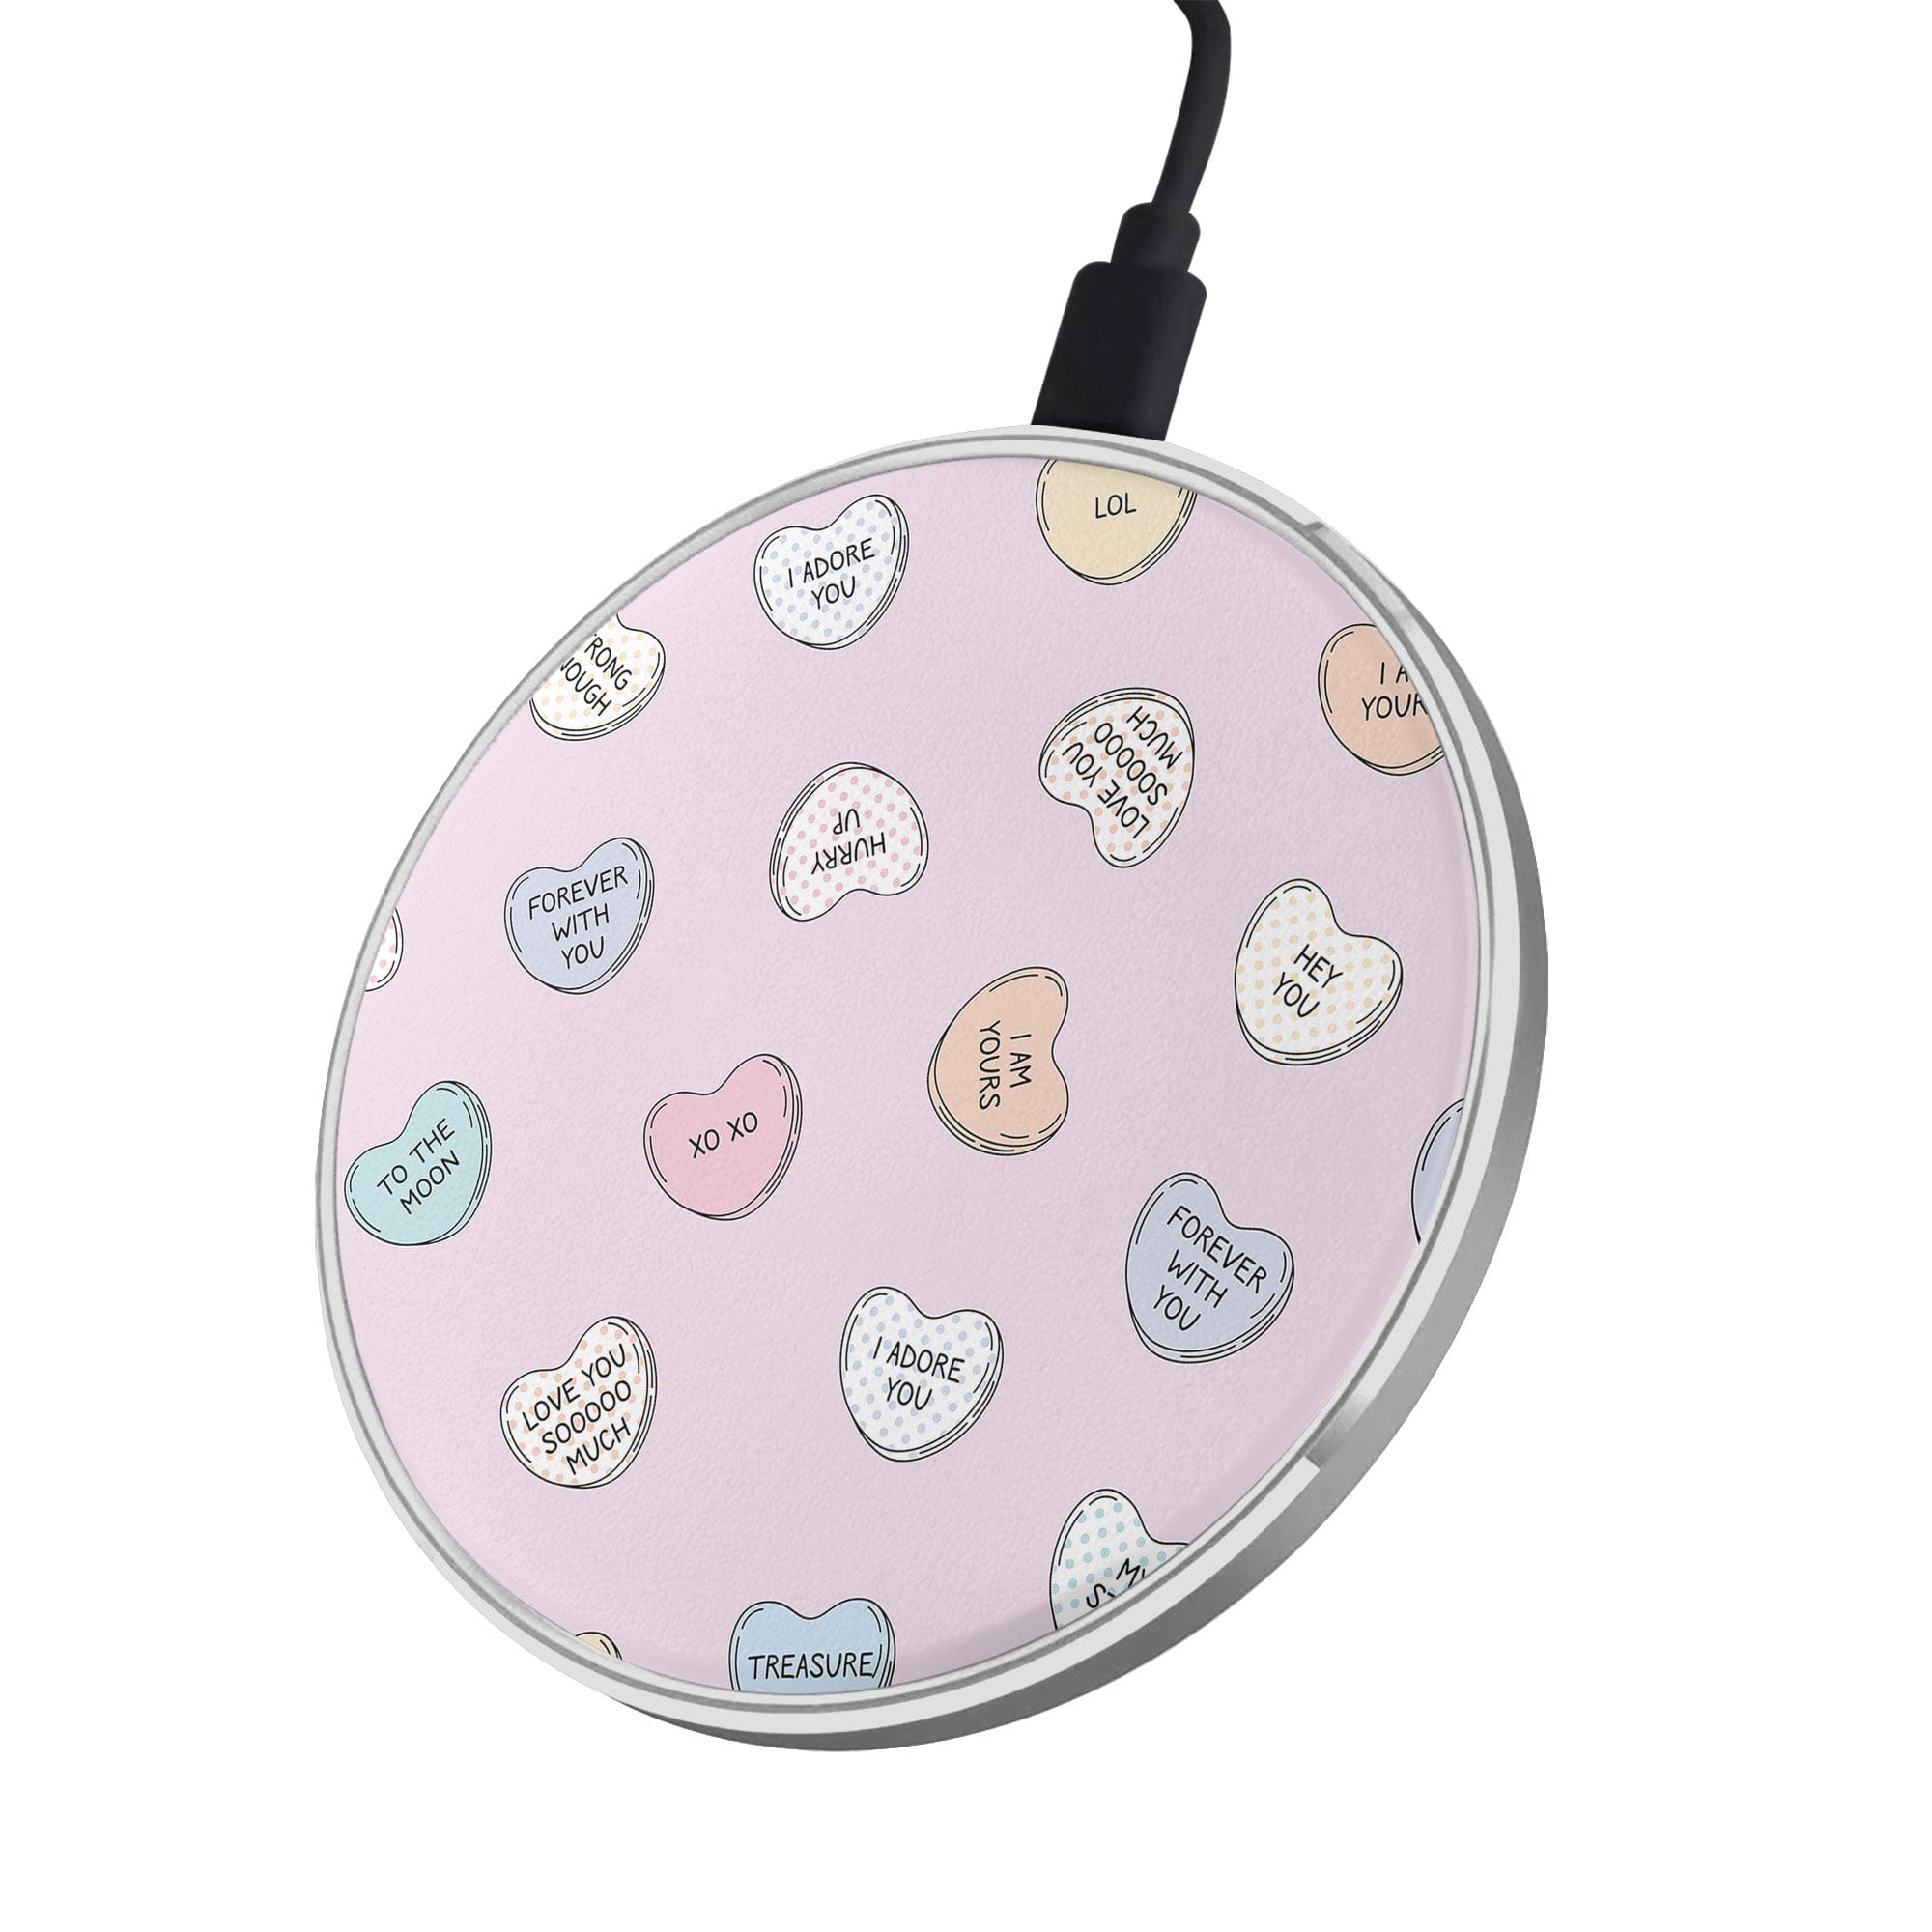 Sweet Nothings | Candy Hearts Wireless Charging Pad